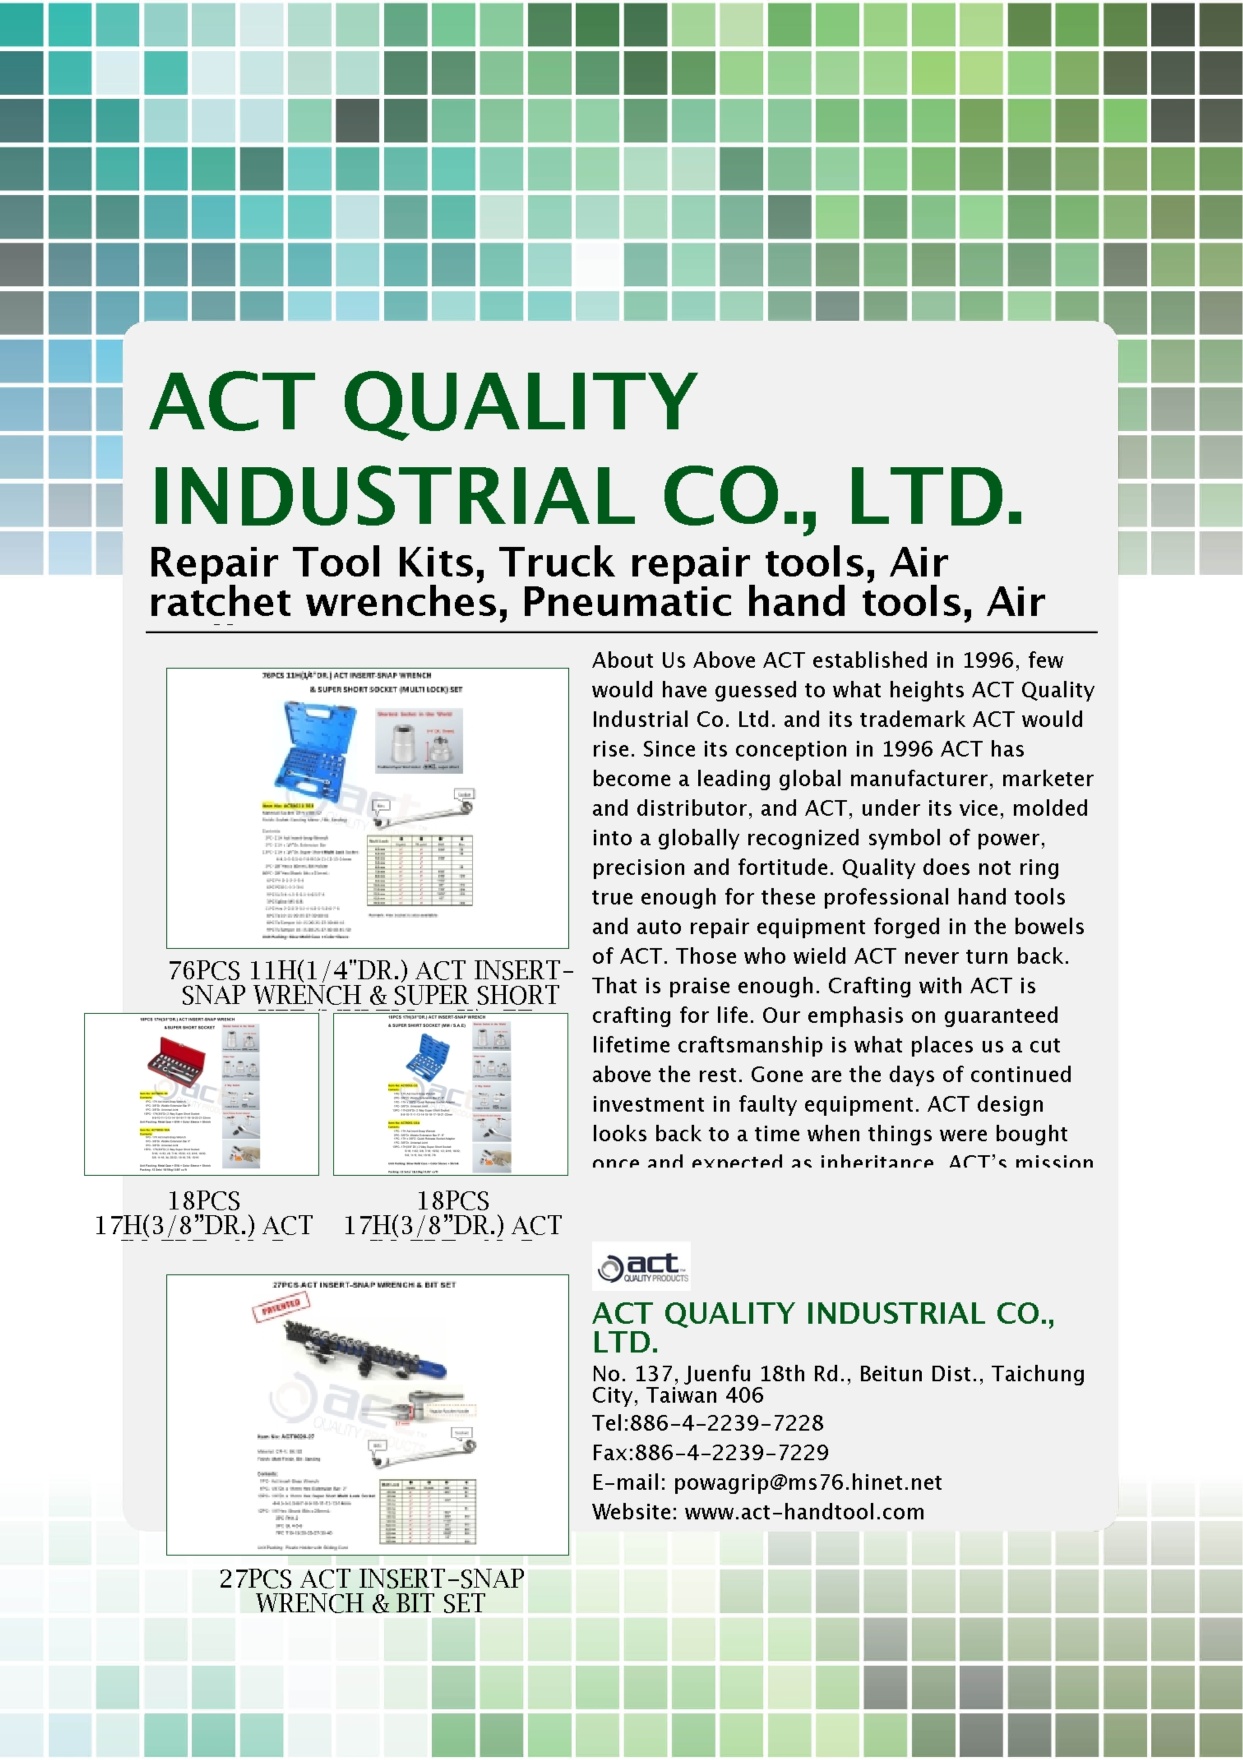 ACT QUALITY INDUSTRIAL CO., LTD.